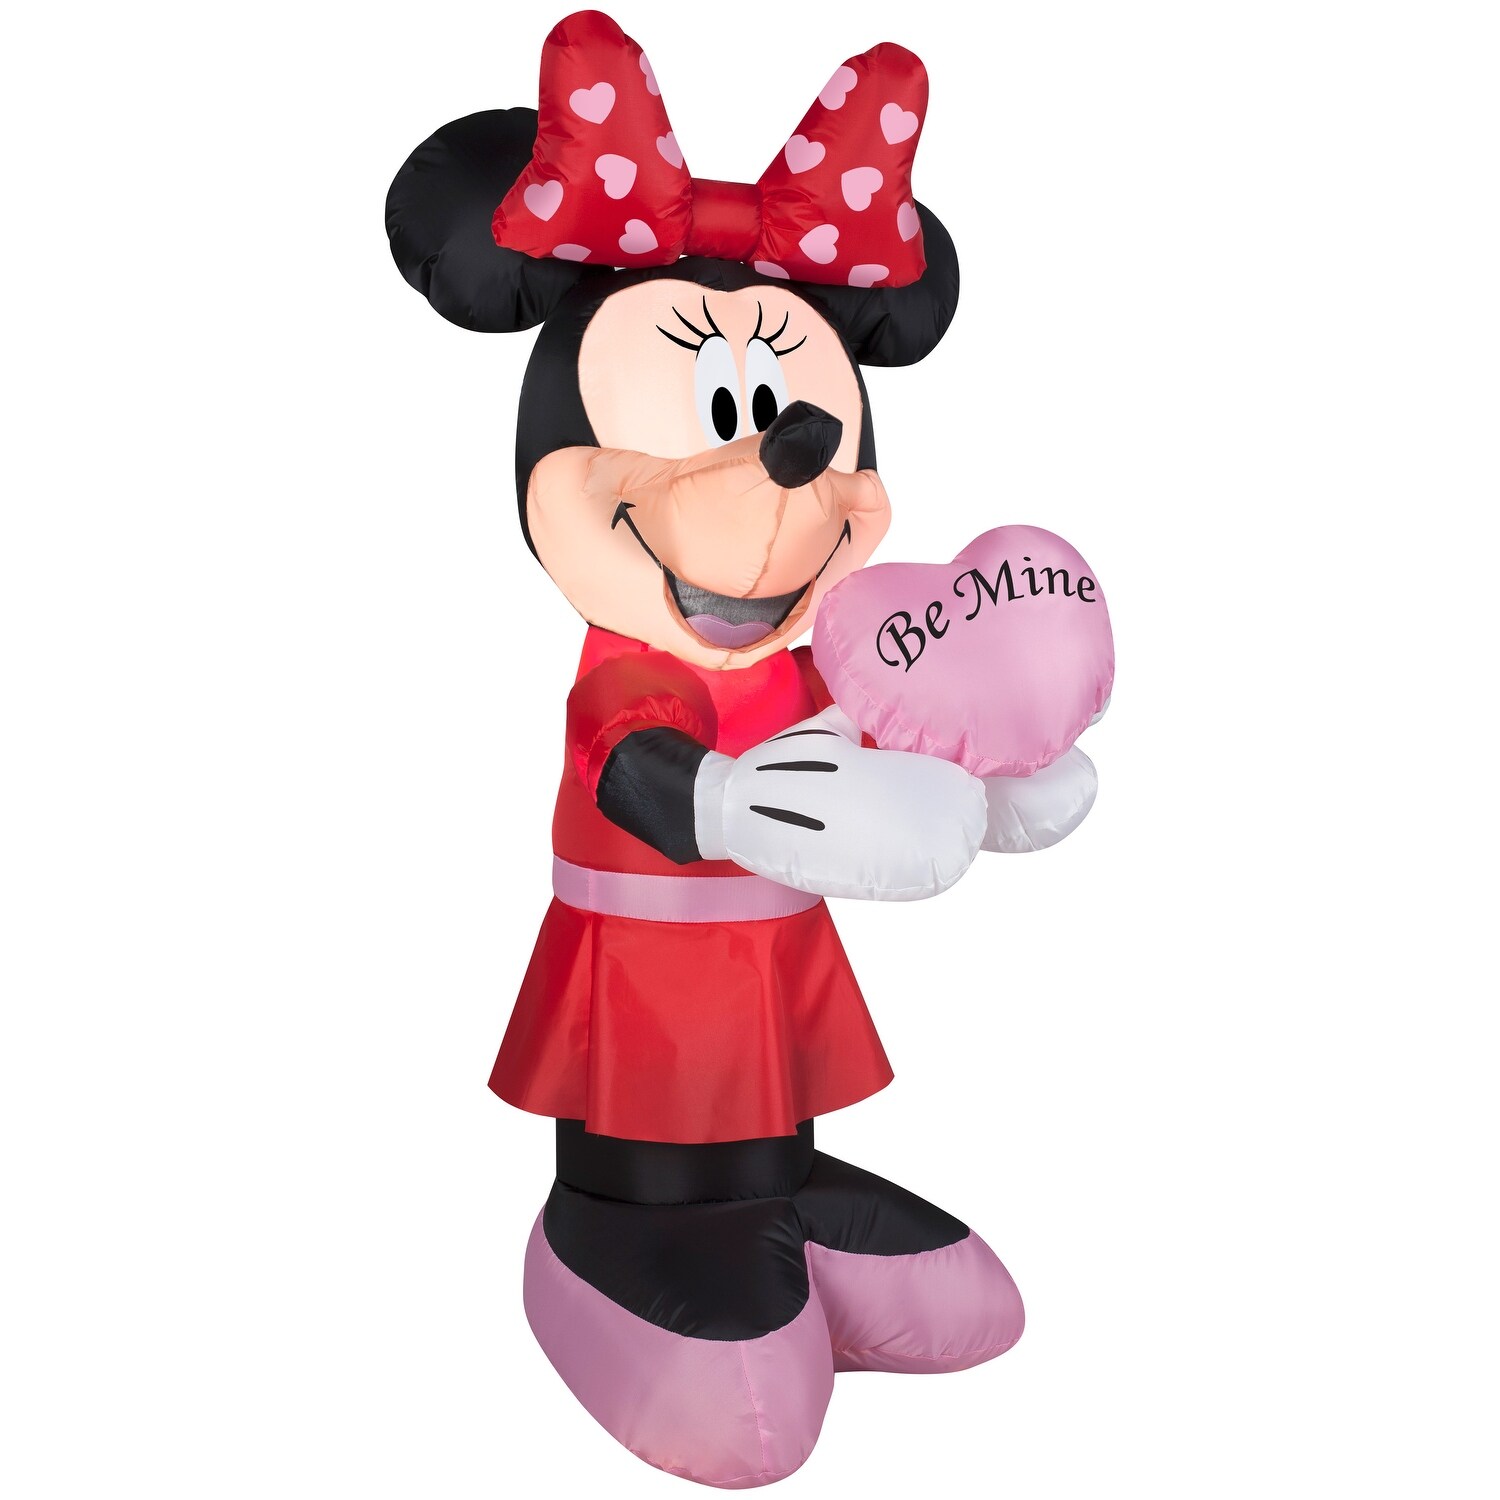 Gemmy Airblown Inflatable Valentine Minnie Mouse, 3.5 ft Tall, red -  42.13x21.65x18.9